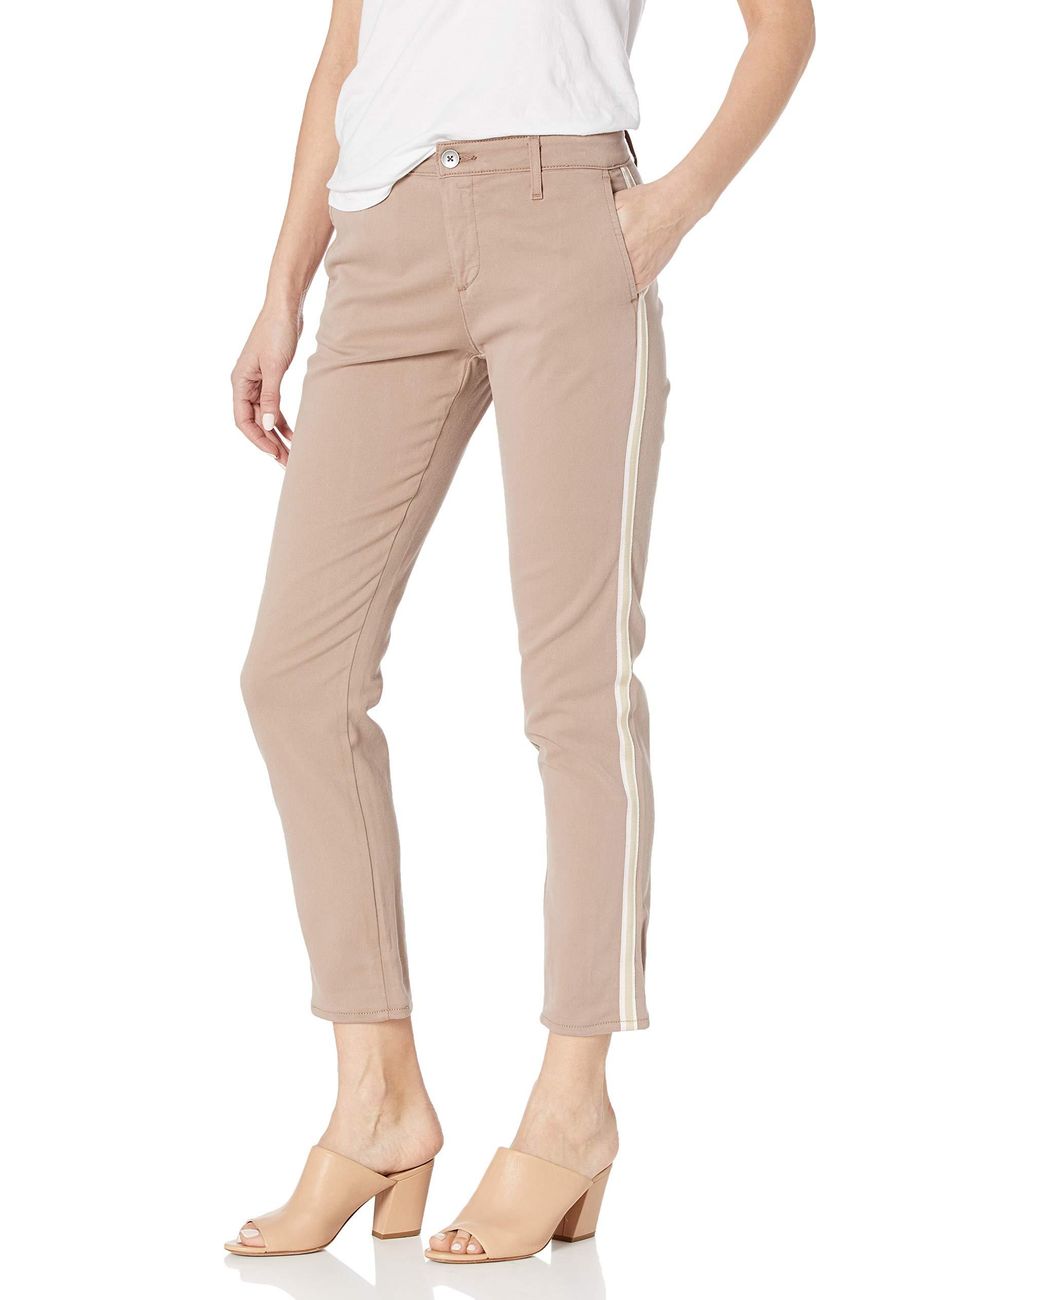 AG Jeans Caden Tailored Fit Trouser Pant in Natural - Lyst